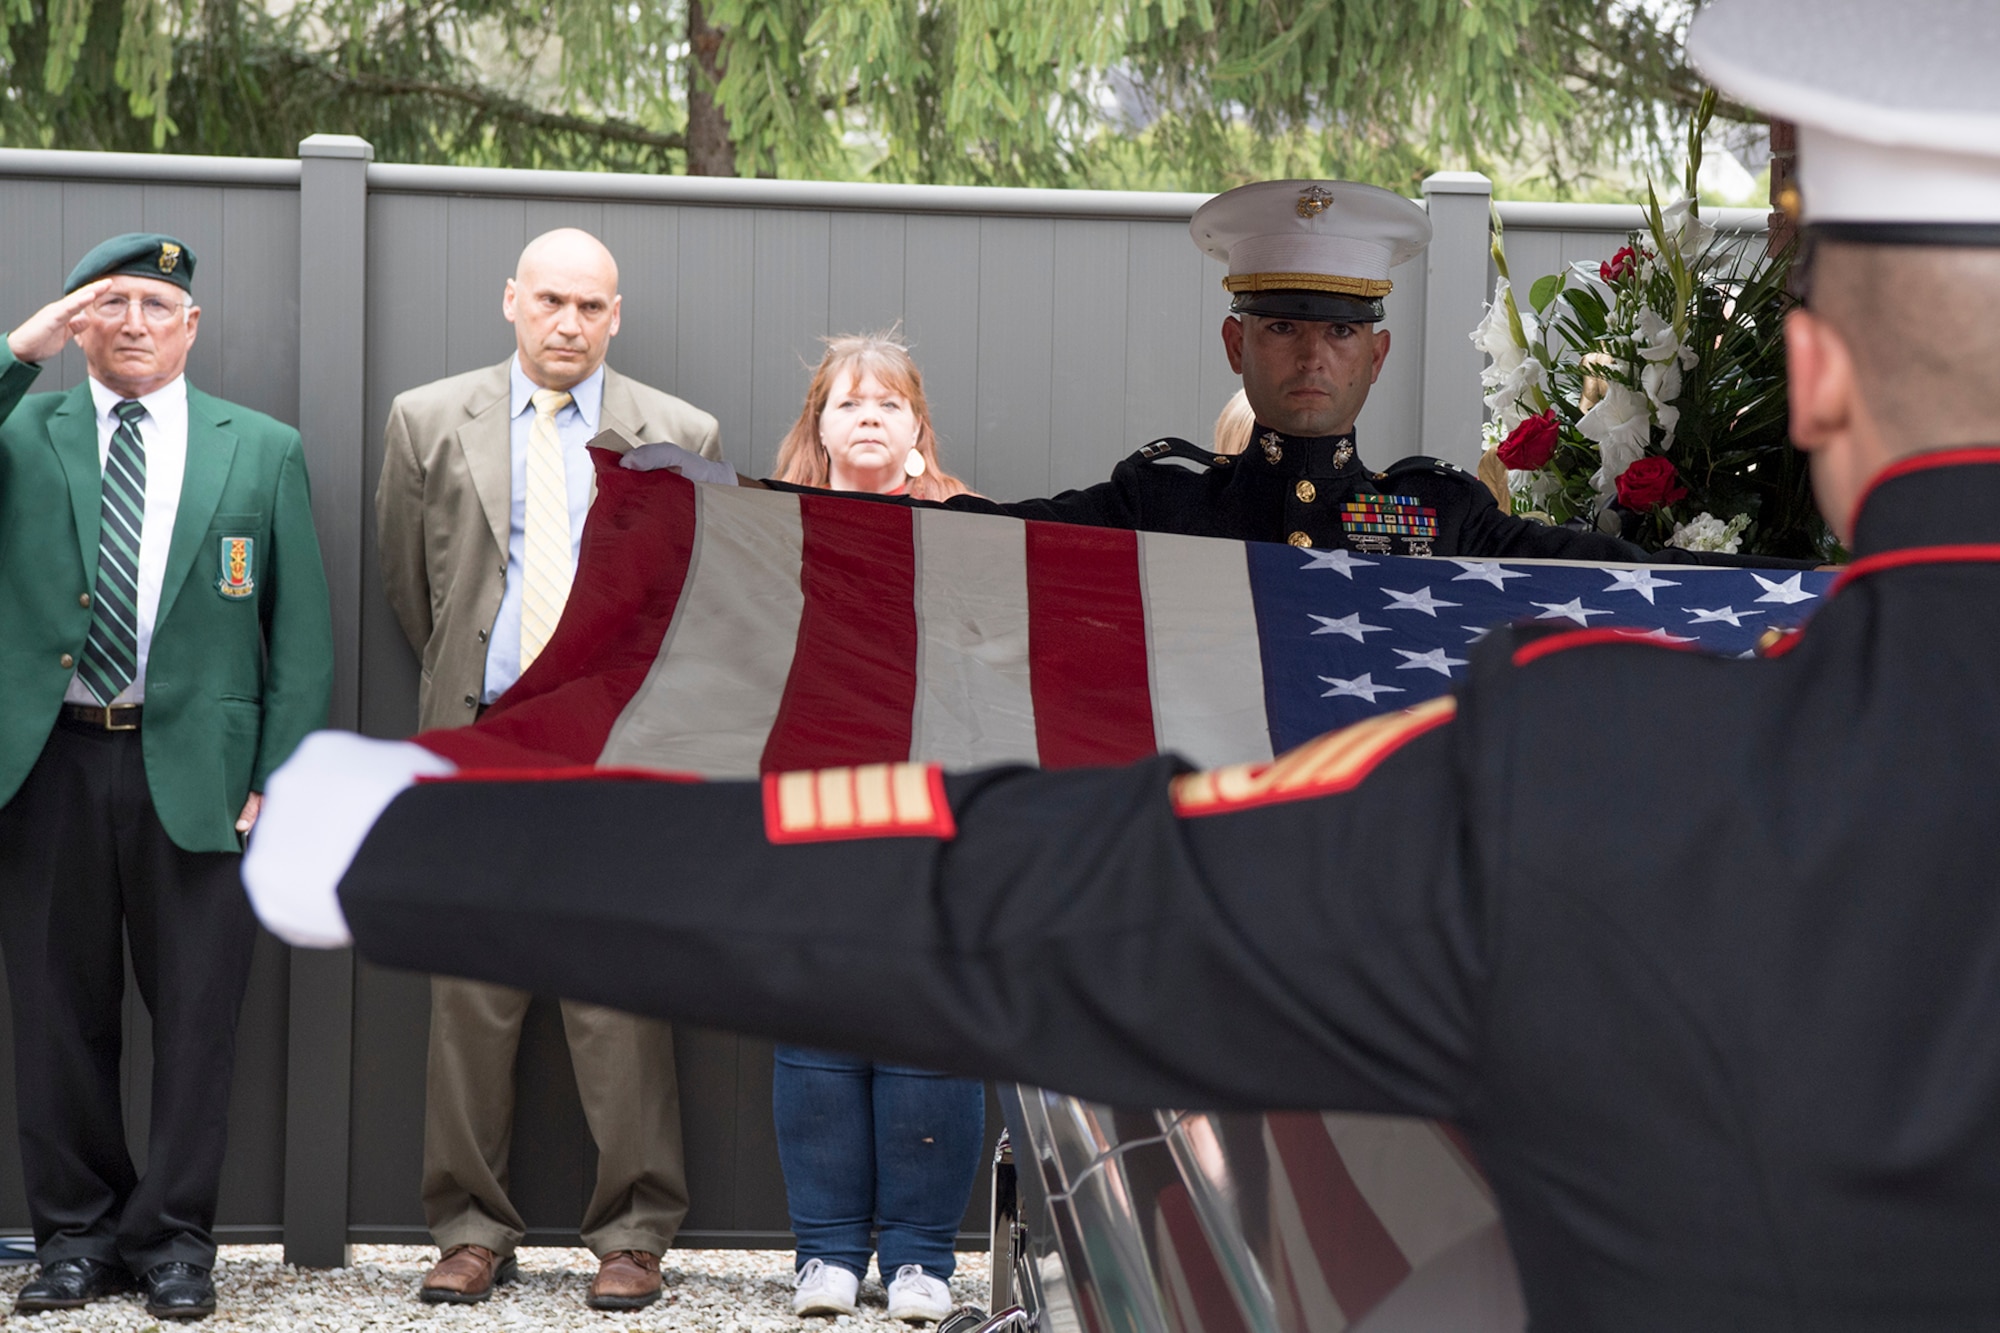 Capt. Pierce Virag and First Sgt. Philip Kent, Detachment 1, Communications Company, Combat Logistics Regiment 45, 4th Marine Logistics Group, honor guard team members perform a flag folding ceremony during the funeral of Pvt. Fred Freet April 18, 2019 at the Marion Indiana National Cemetery. The young Marine was killed in action during World War II, and declared by the military as unrecoverable killed in action until Aug. 6, 2018 when the U.S. Navy positively identified his remains. (U.S. Air Force Photo/Master Sgt. Ben Mota)